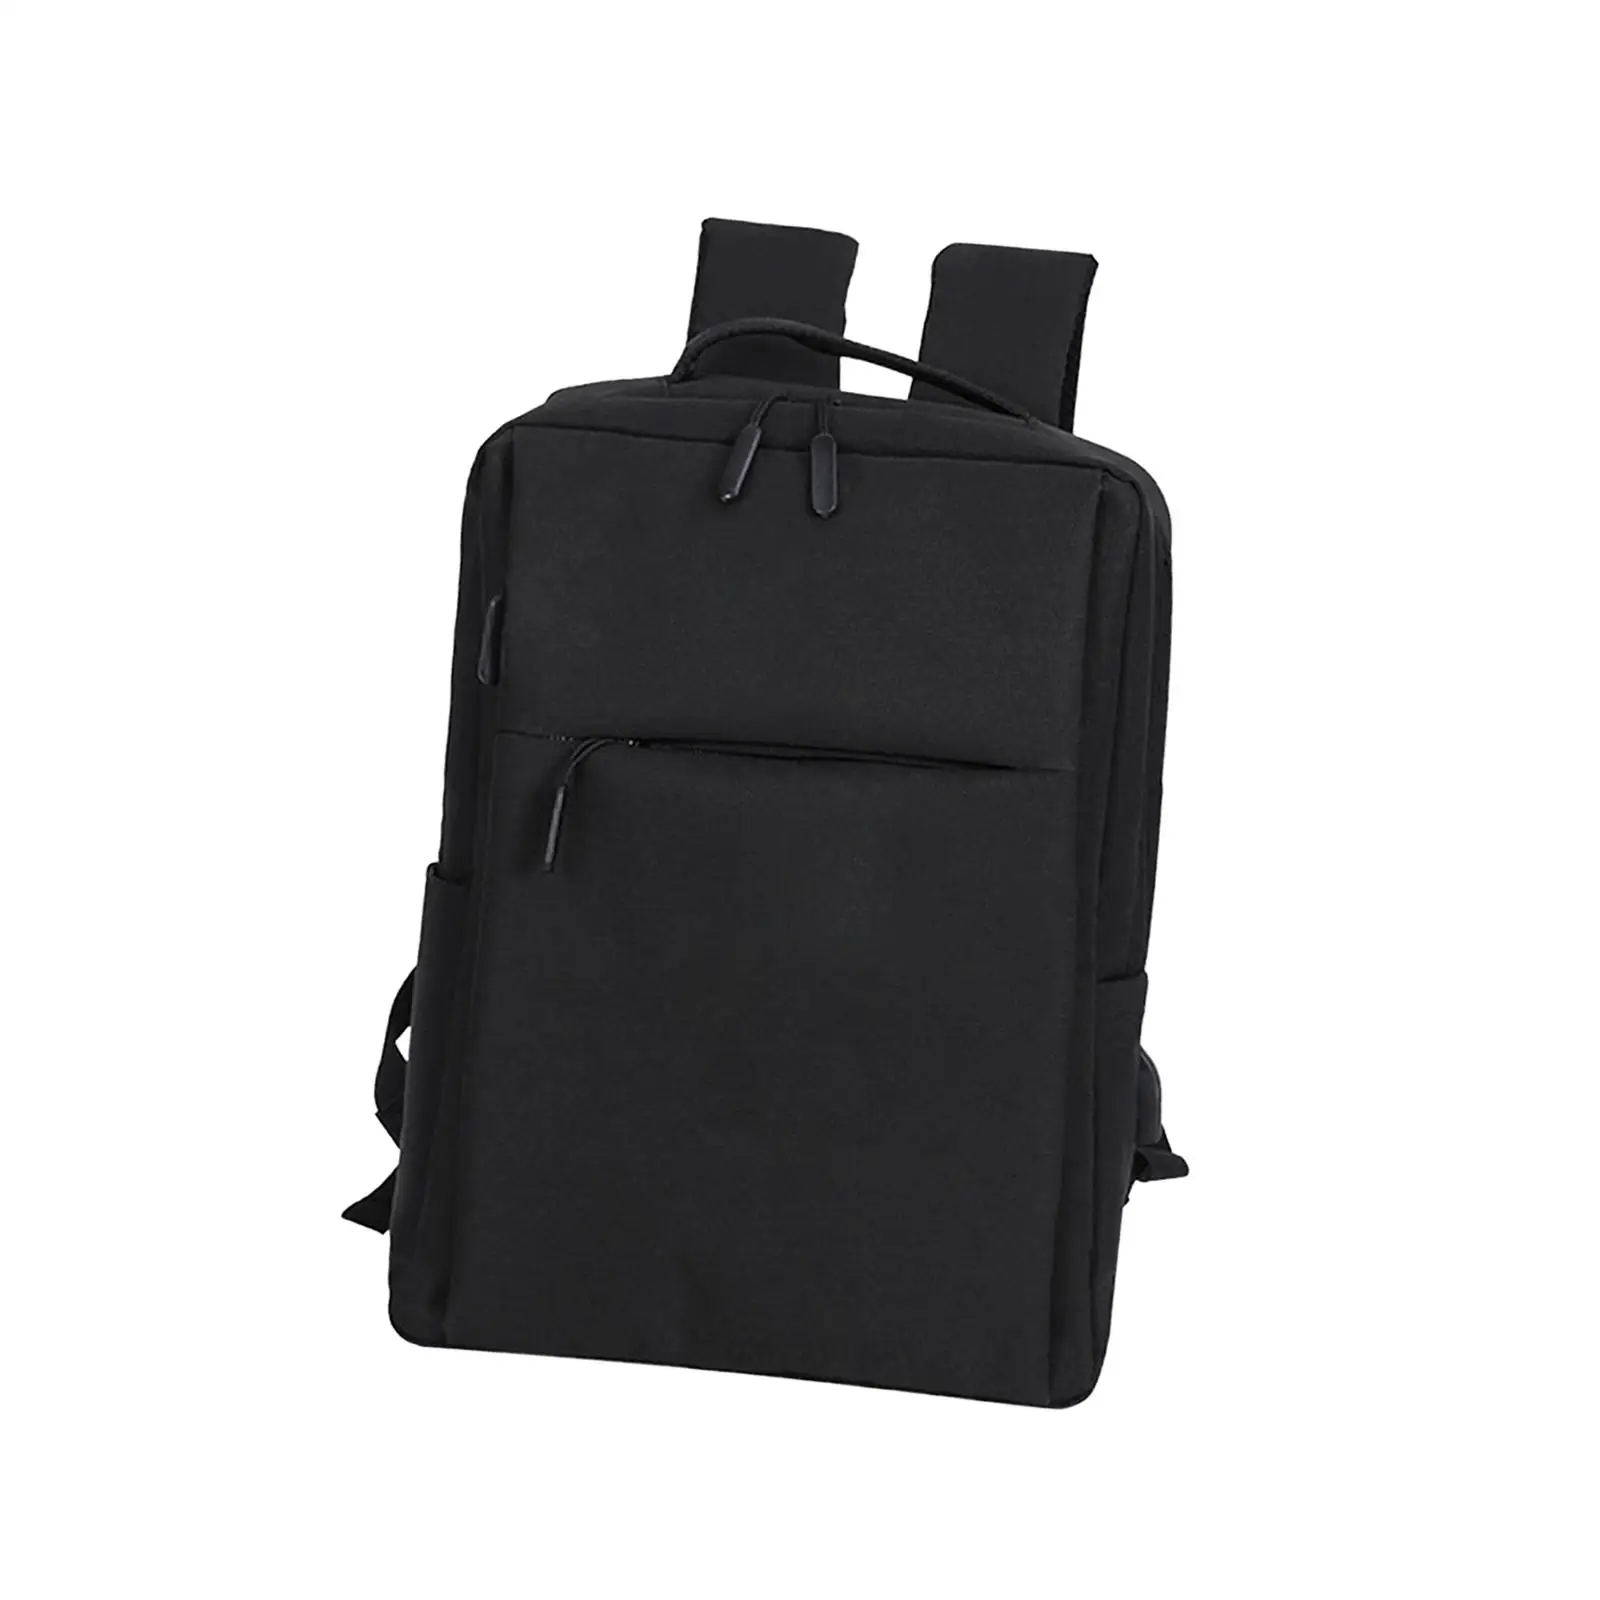 Laptop Backpack Travel Business Backpack Multi Purpose Fits up to 15.6 Inches Laptop Durable Water Repellent Built in USB Port